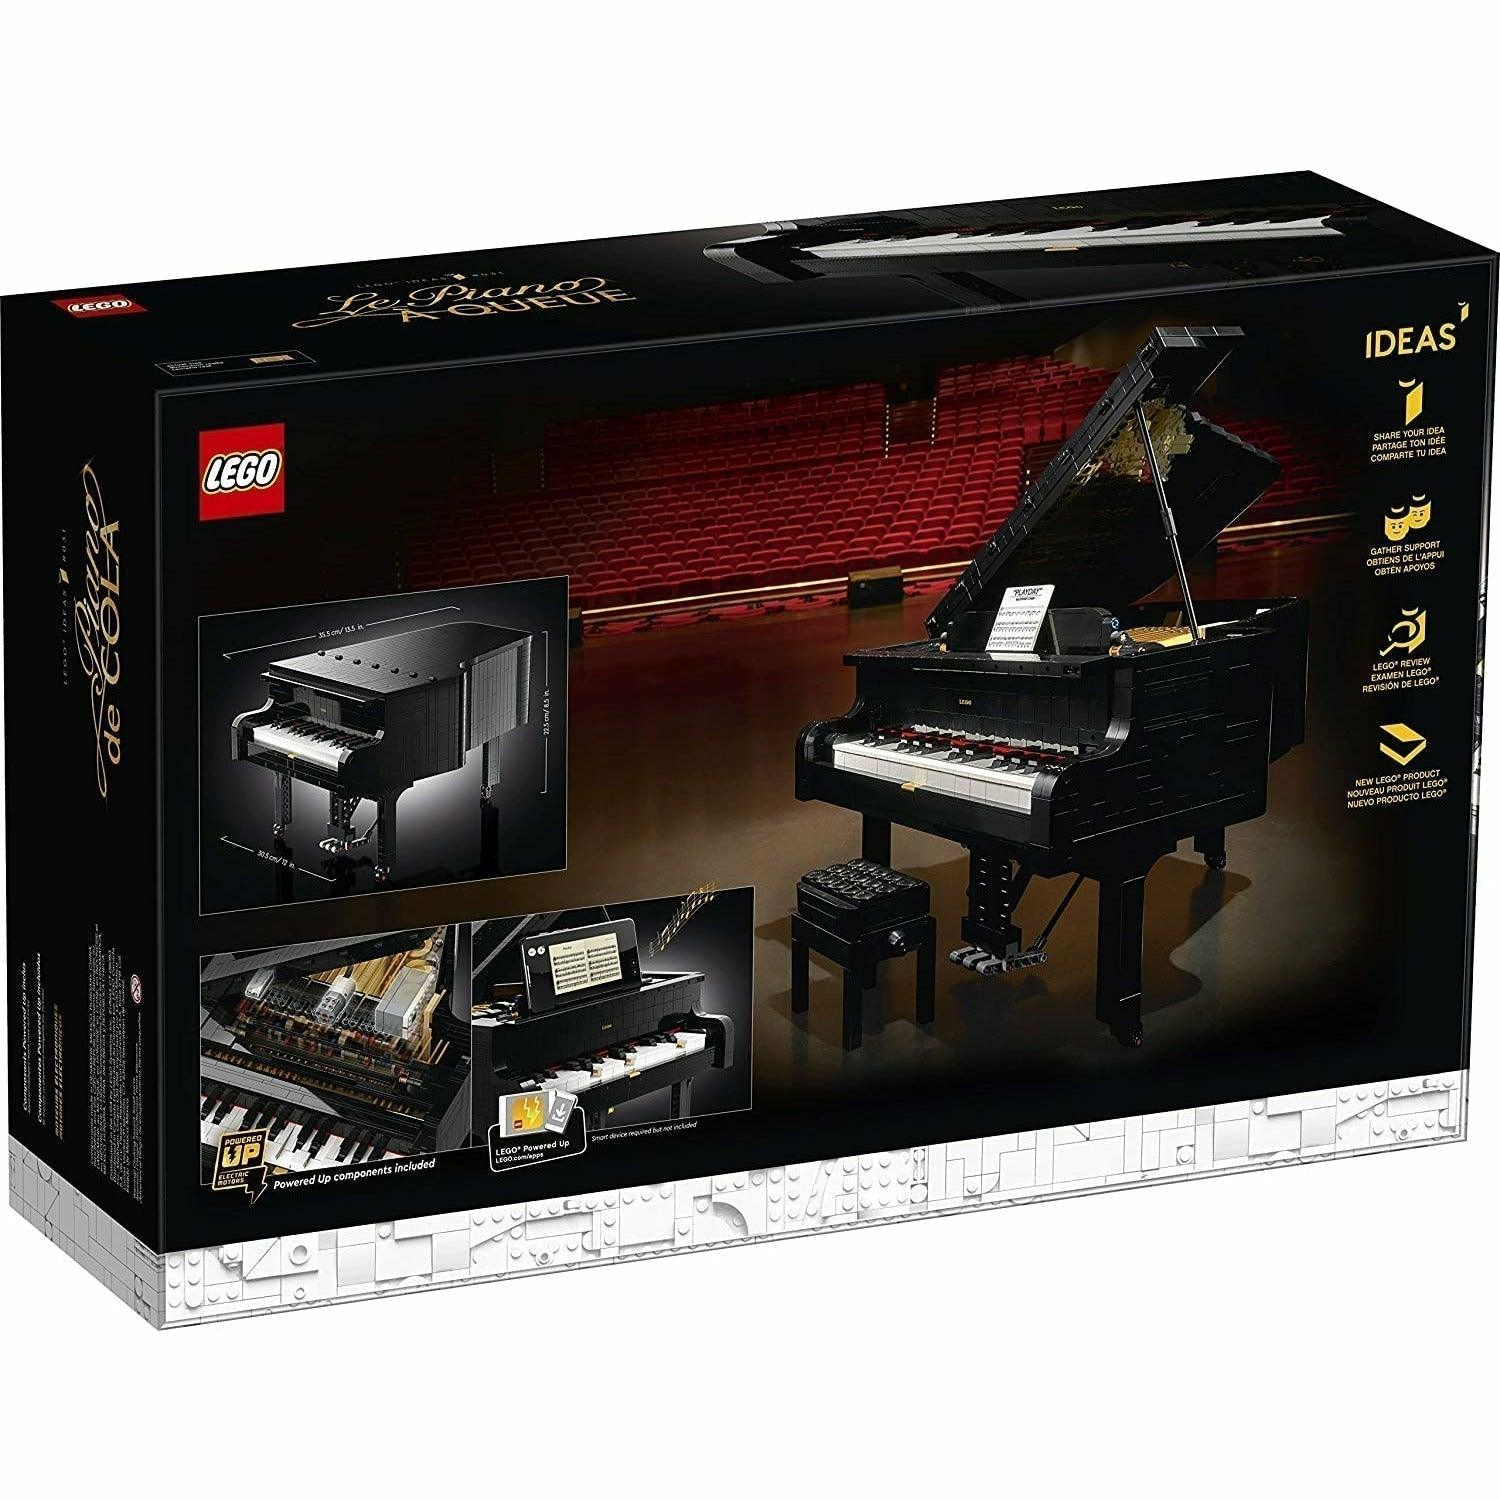 LEGO Ideas Grand Piano 21323 Model Building Kit, Build Your Own Playable Grand Piano, an Exciting DIY Project for The Pianist, (3,662 Pieces) - BumbleToys - 18+, Boys, Girls, Ideas, LEGO, Musical Instruments, OXE, Pre-Order